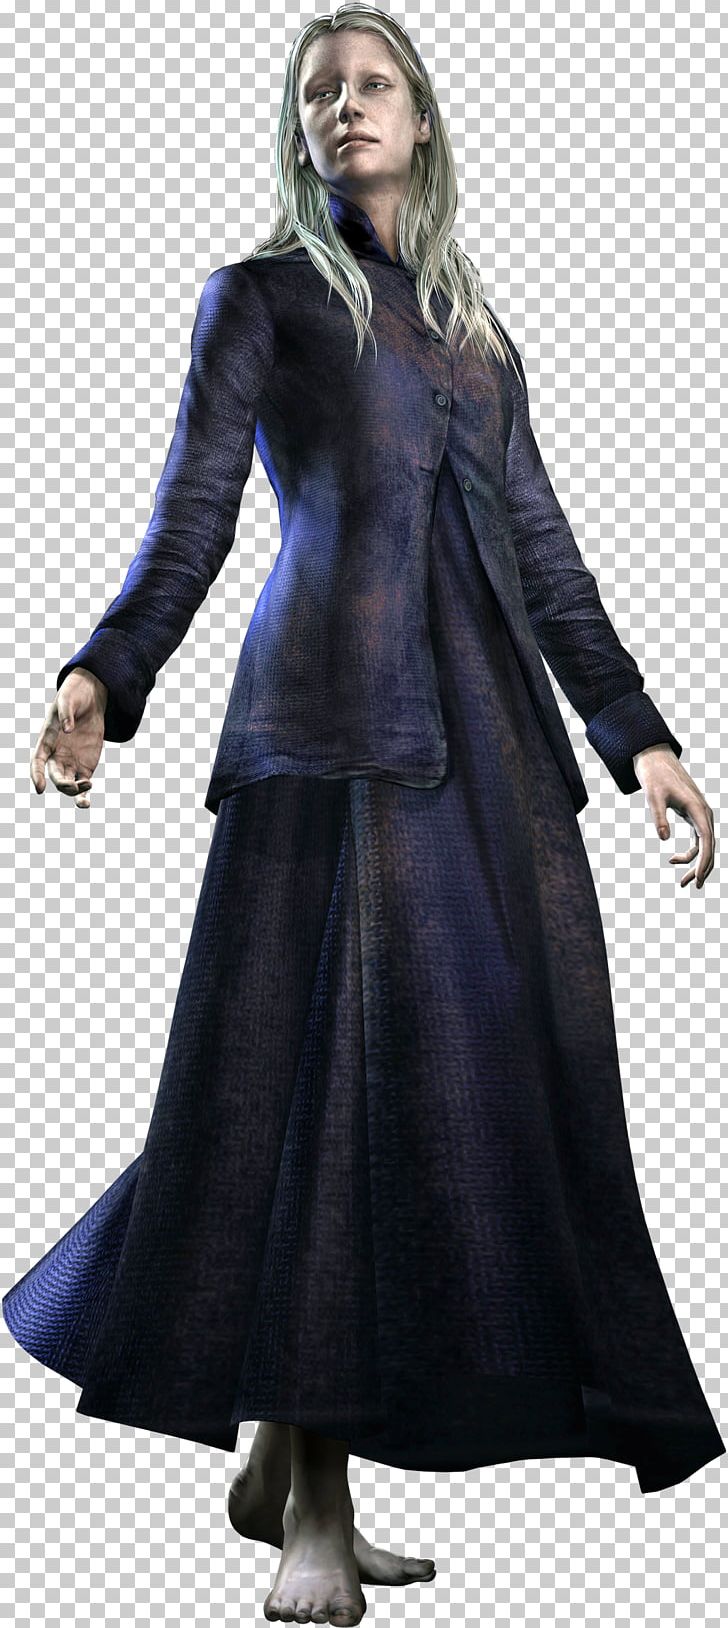 Silent Hill 3 Silent Hill: Homecoming Silent Hill HD Collection Heather Mason PNG, Clipart, Alessa Gillespie, Character, Coat, Costume, Costume Design Free PNG Download